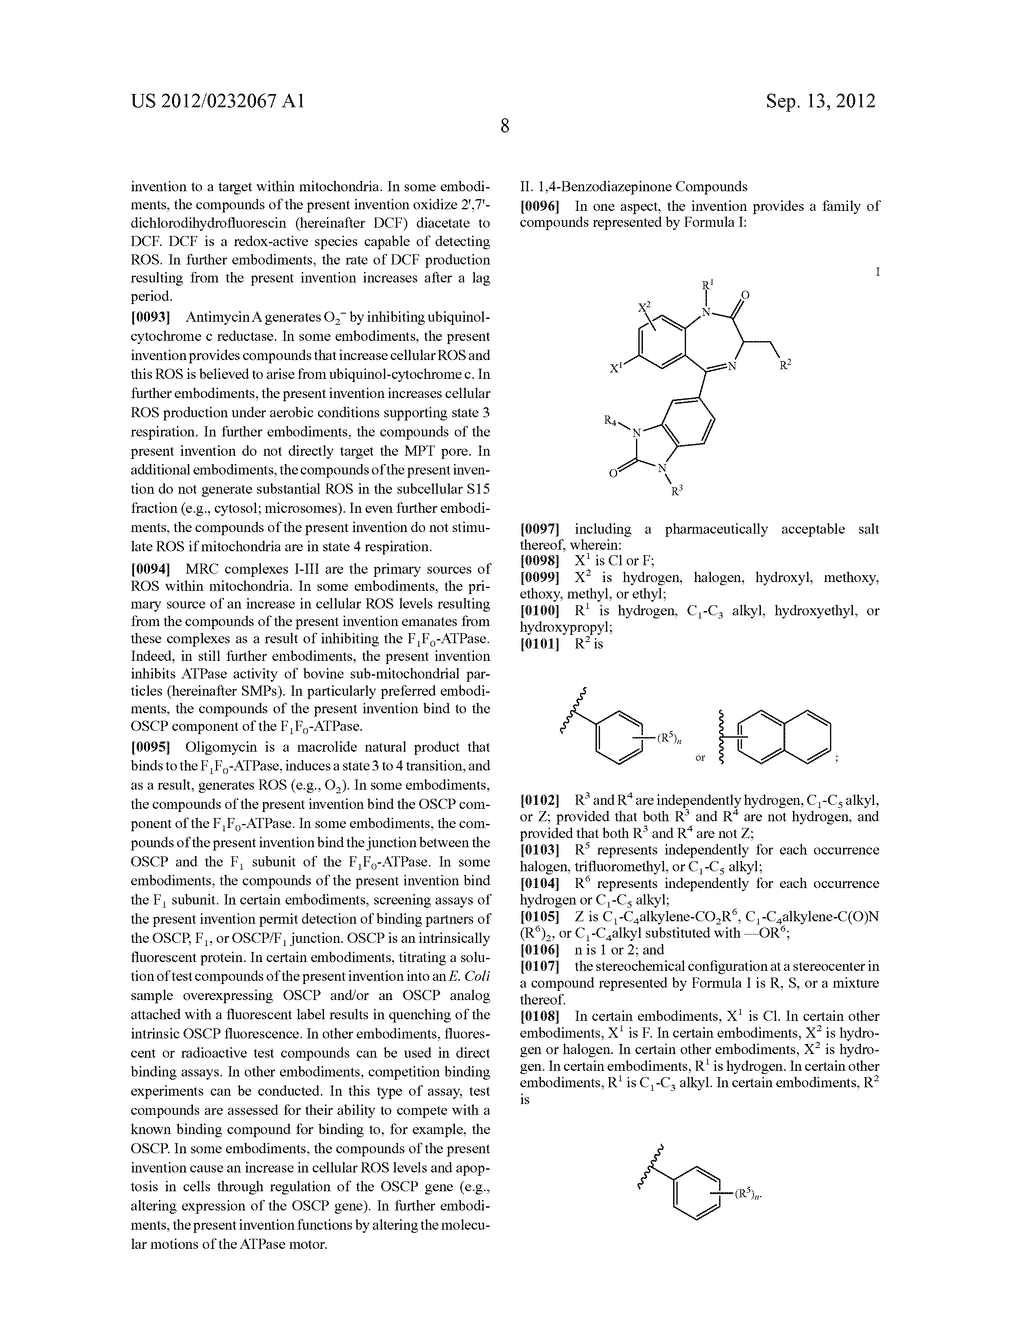 BENZODIAZEPINONE COMPOUNDS AND METHODS OF TREATMENT USING SAME - diagram, schematic, and image 09